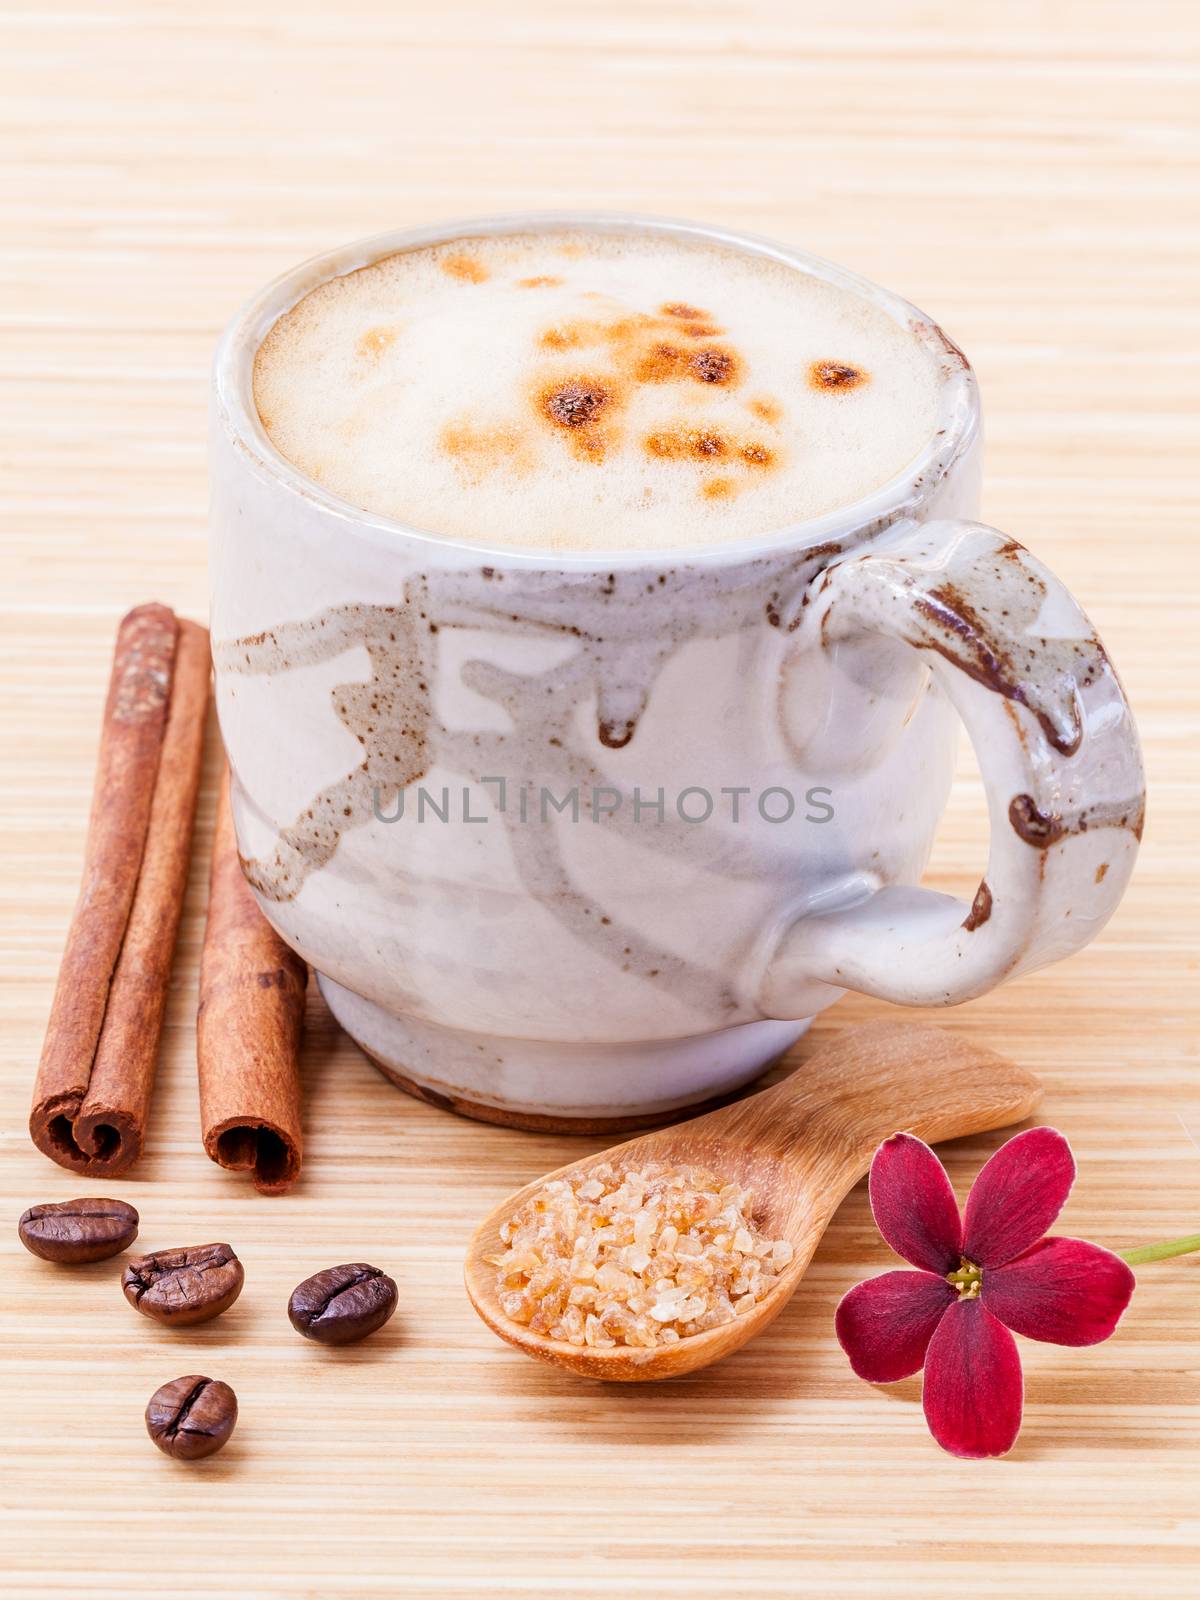 A cup of coffee on wooden background. by kerdkanno